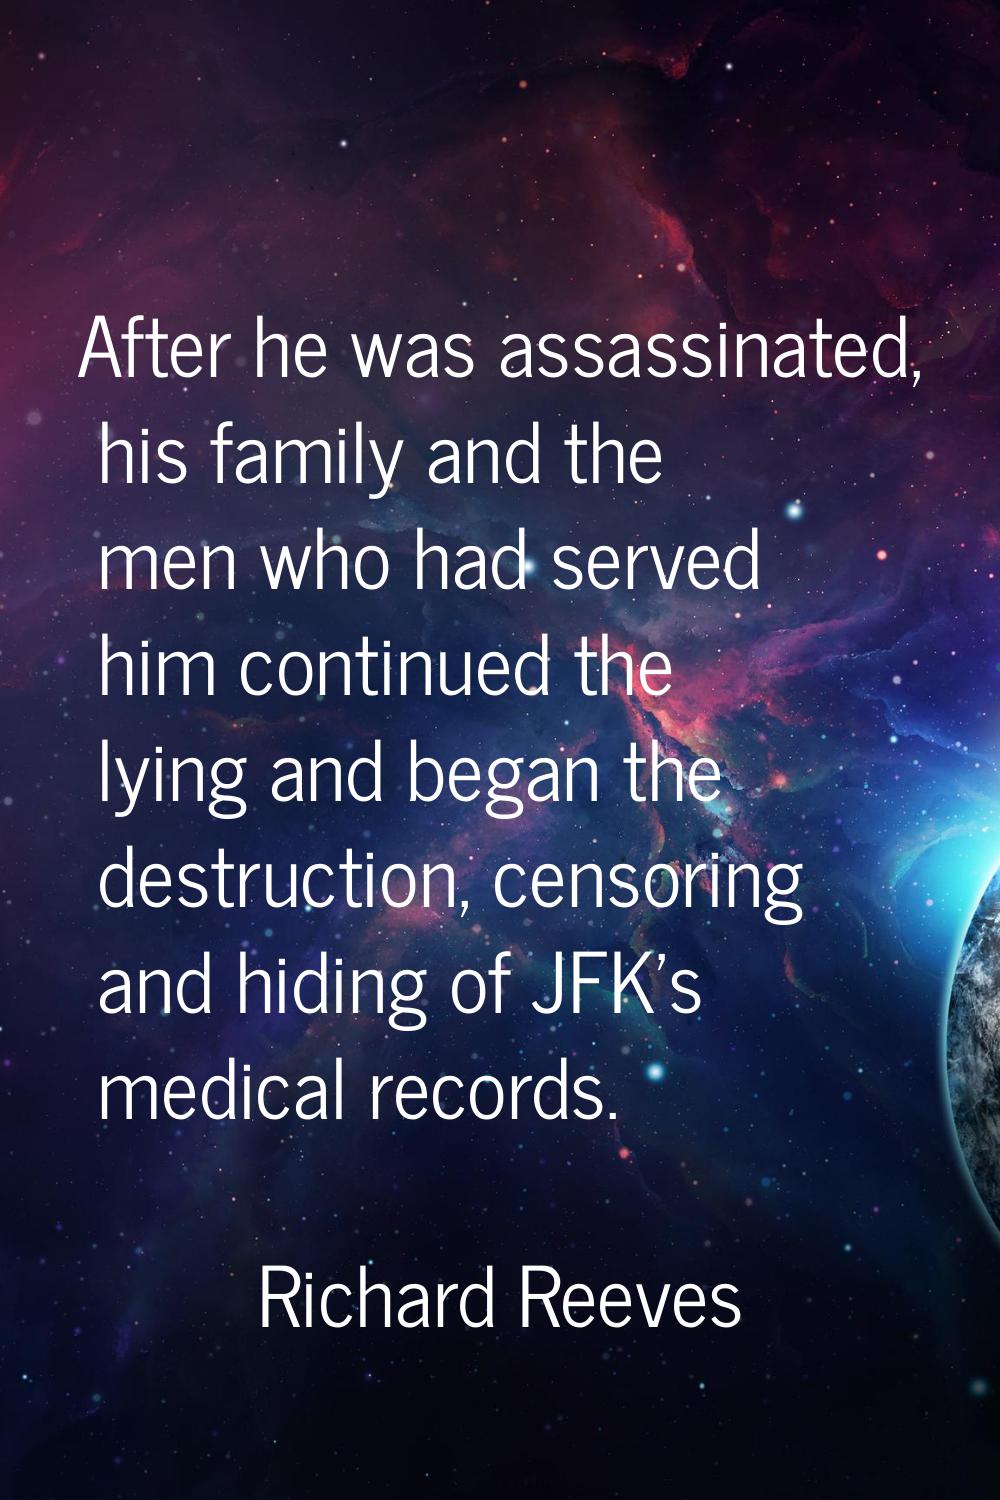 After he was assassinated, his family and the men who had served him continued the lying and began 